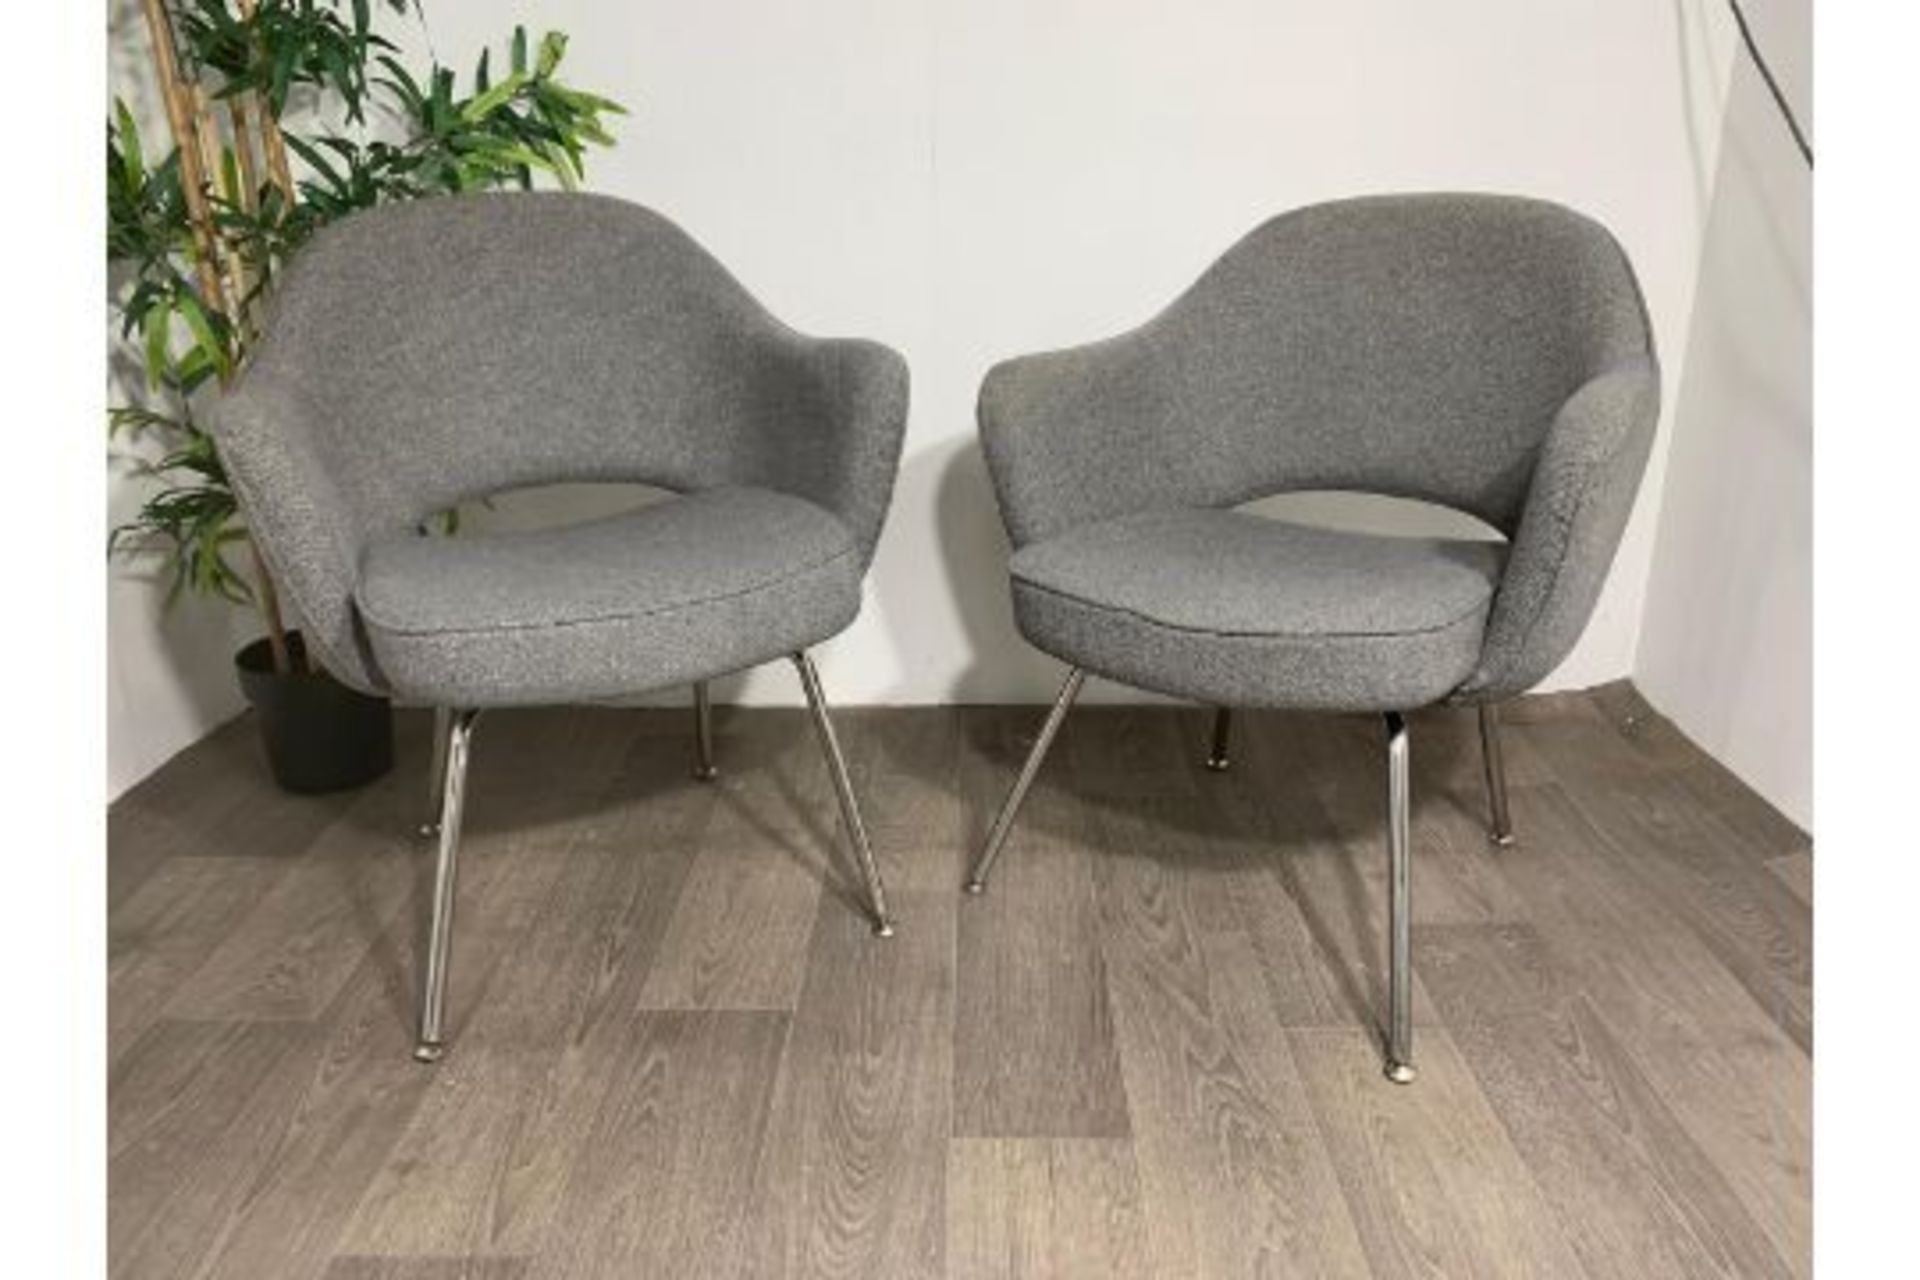 Grey Fabric Commercial Grade Chair with Chrome Leg - Image 2 of 5